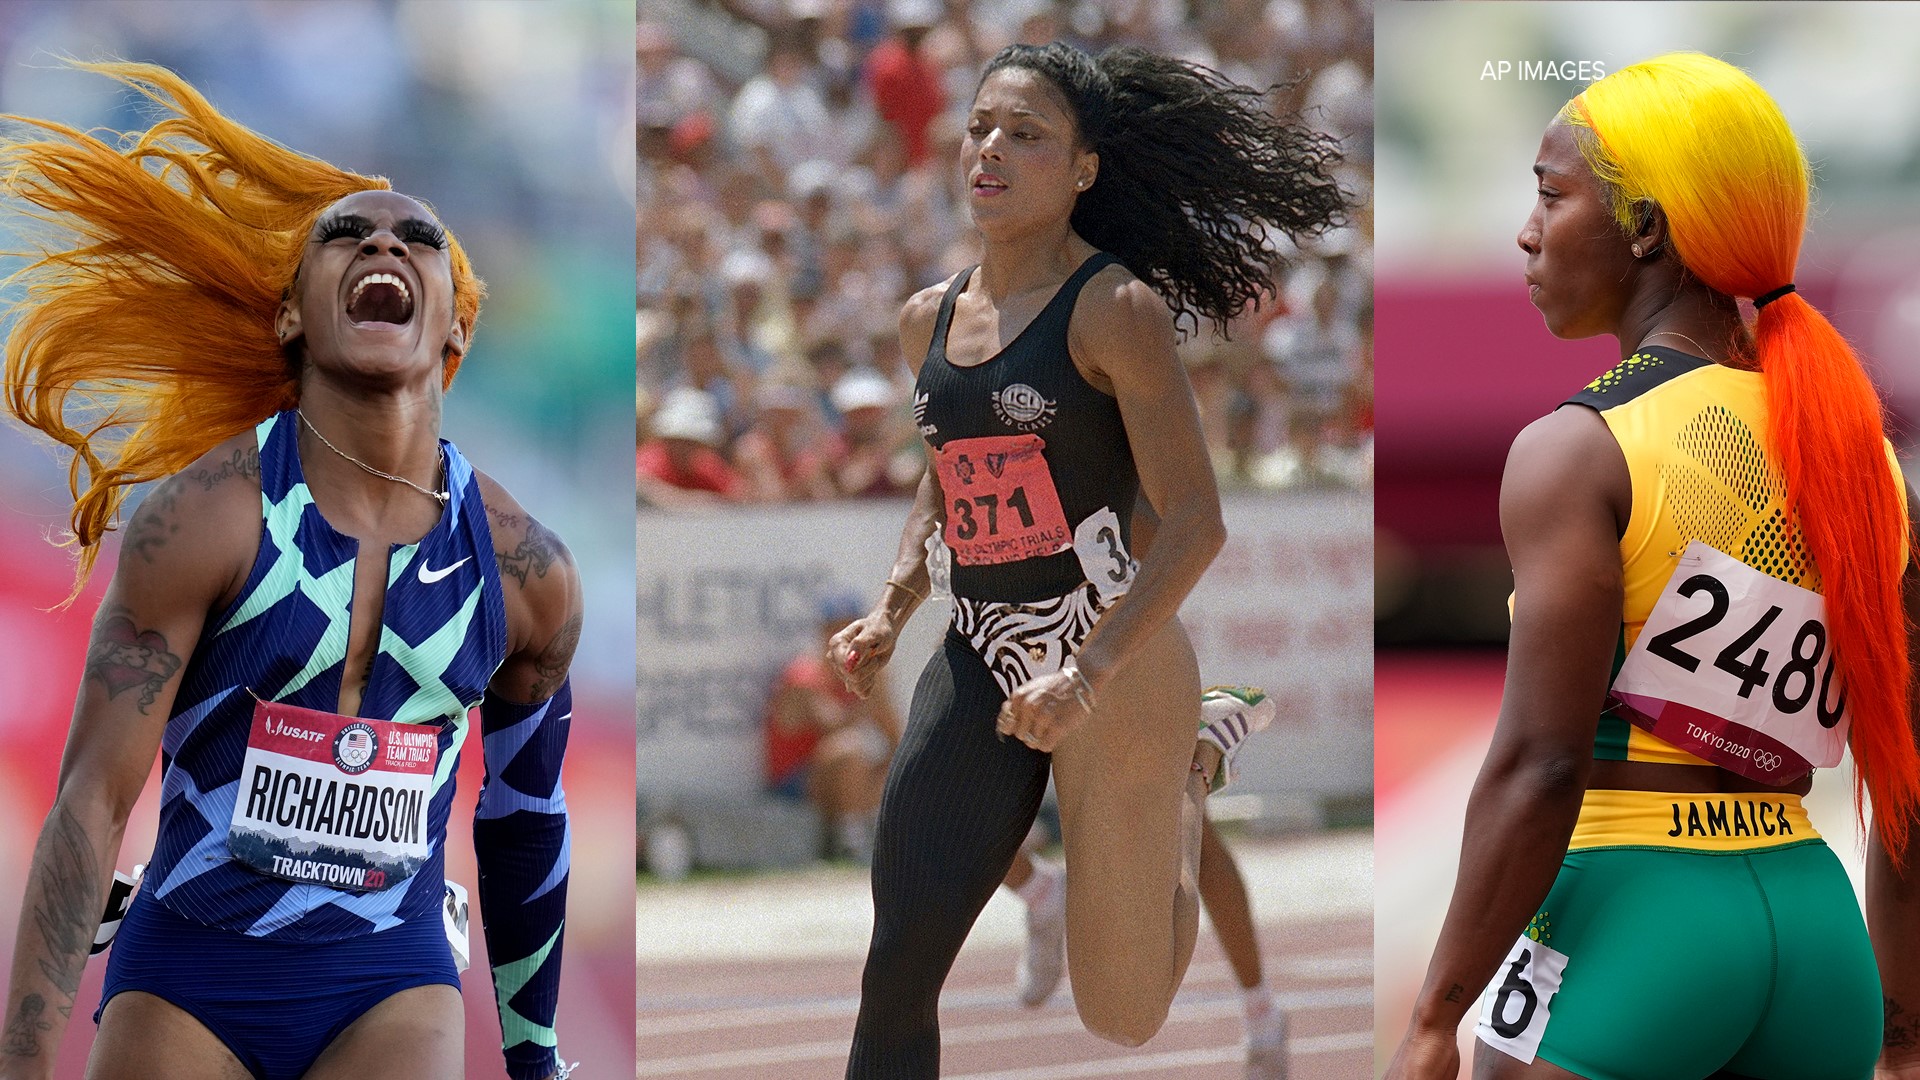 You may have noticed prominent fashion looks at the Tokyo Olympics. Since FloJo's iconic tenure, track and field athletes have flaunted their individual style.